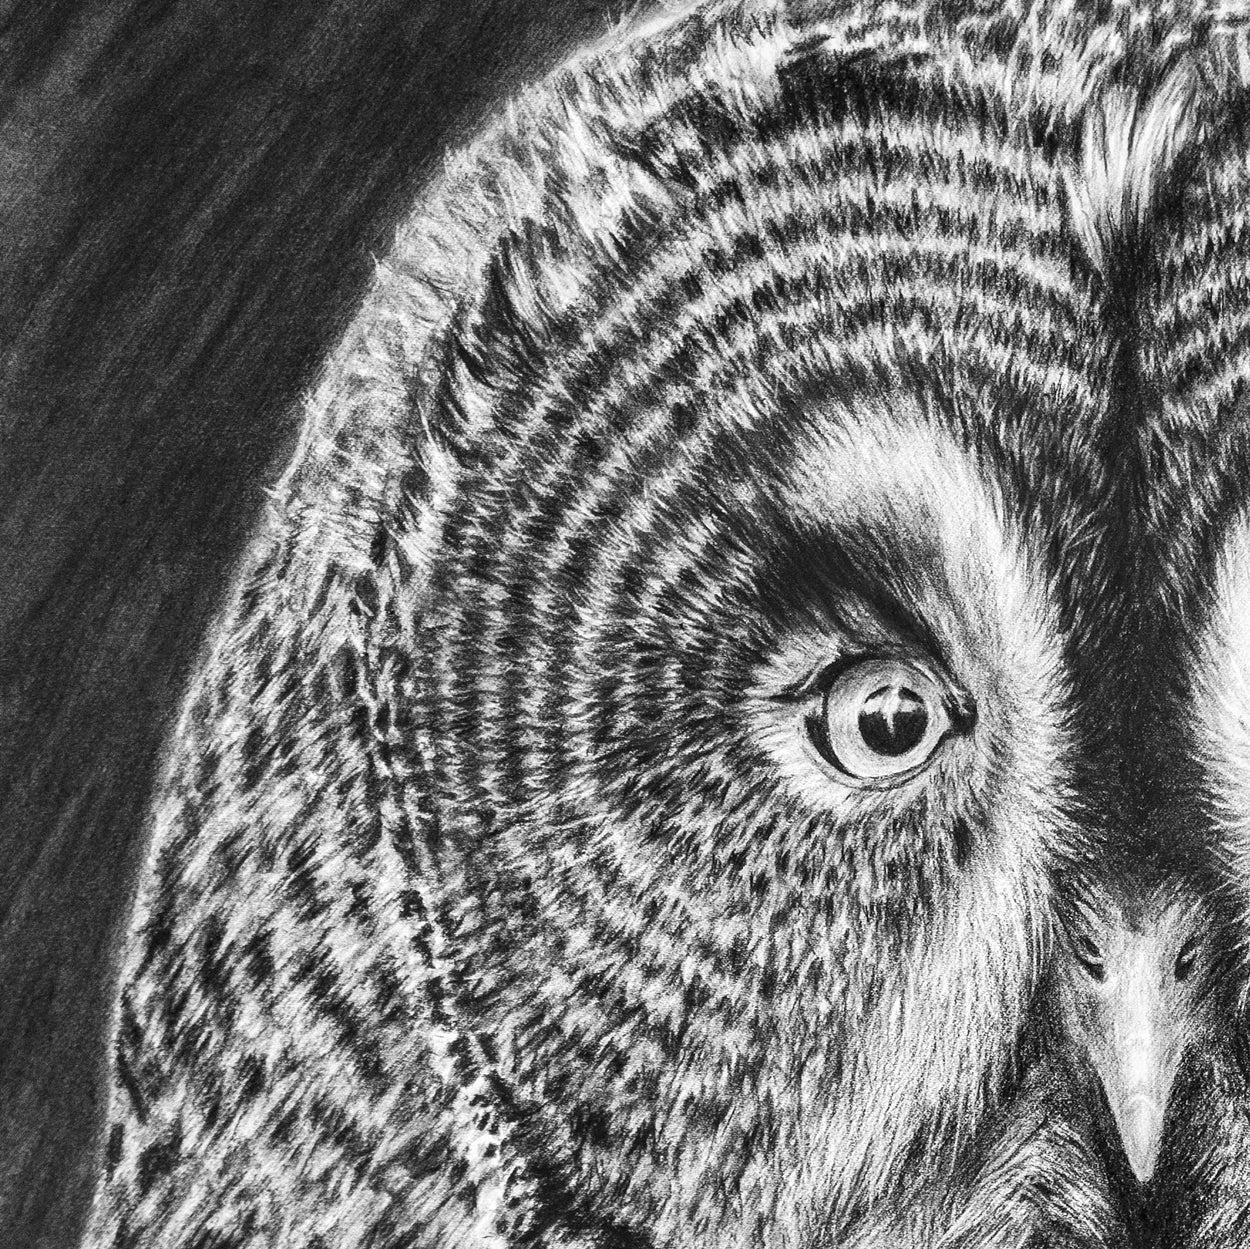 Close-up detail of a charcoal drawing of the eye and half face of a great grey owl